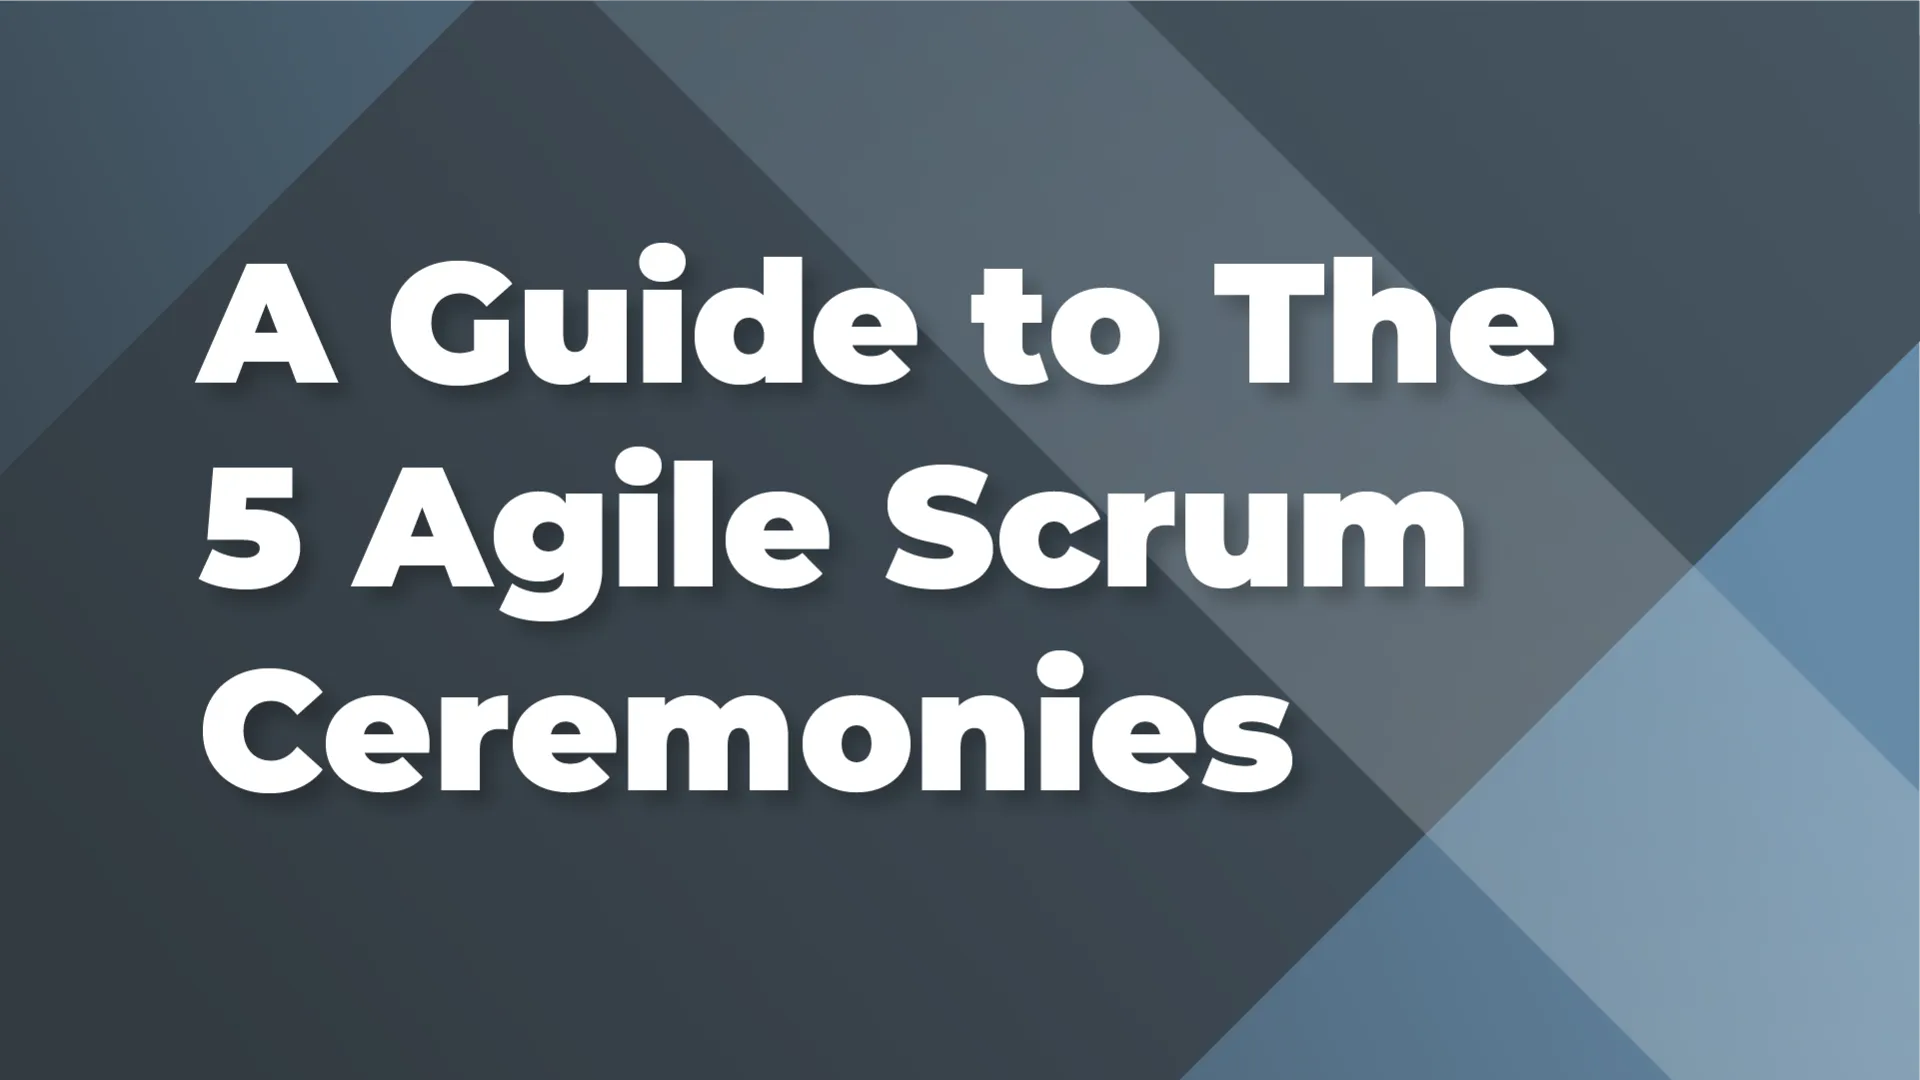 A Guide to The 5 Agile Scrum Ceremonies